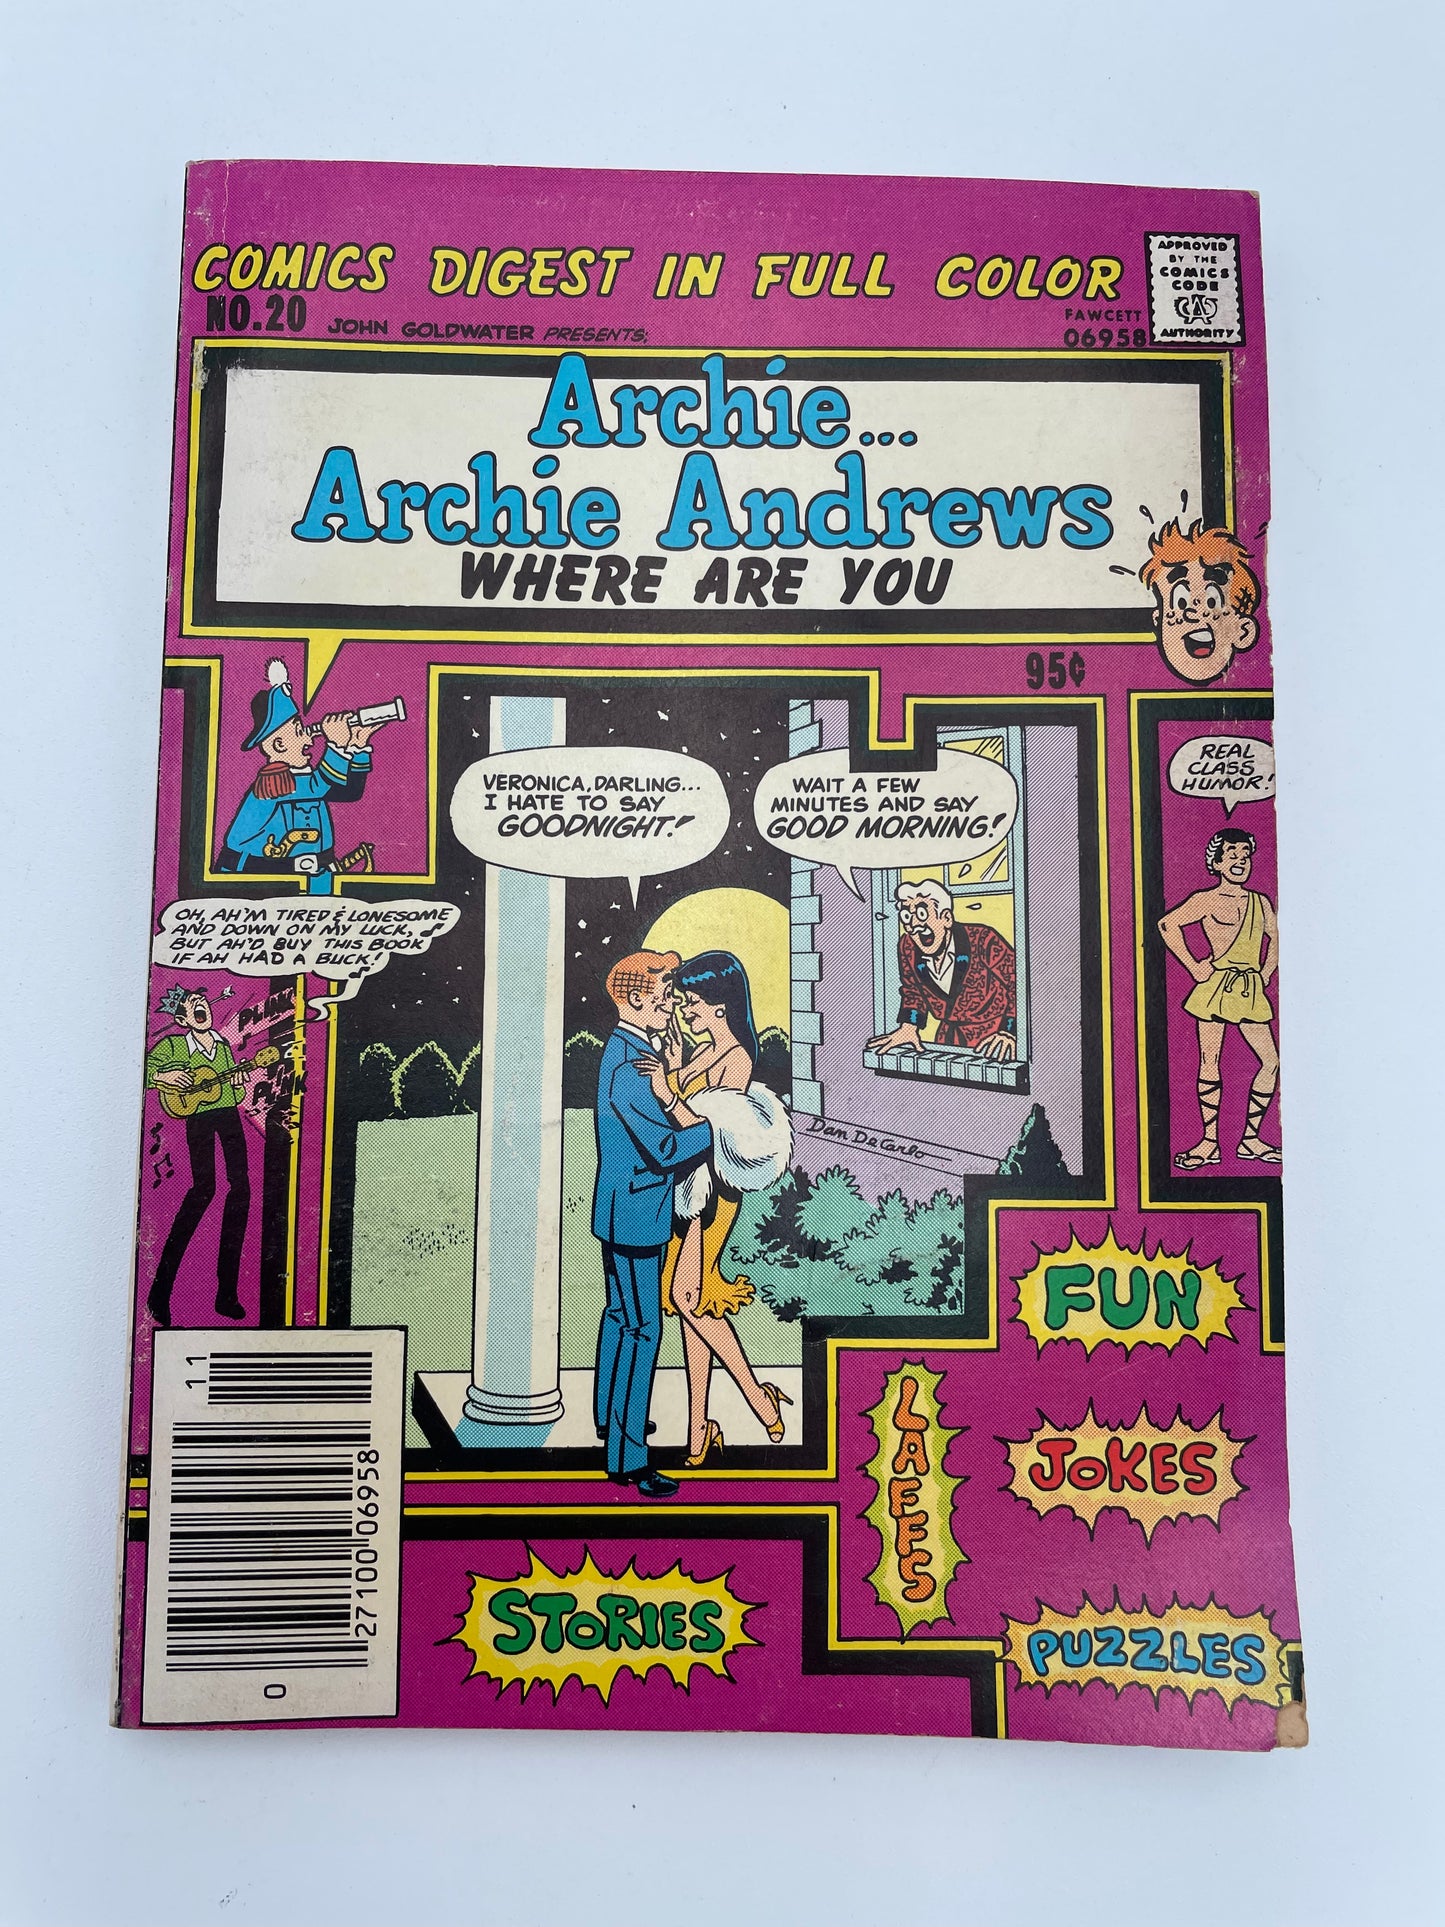 Archie Comic - Archie Andrew’s Where Are You #20 - 1981 #102029